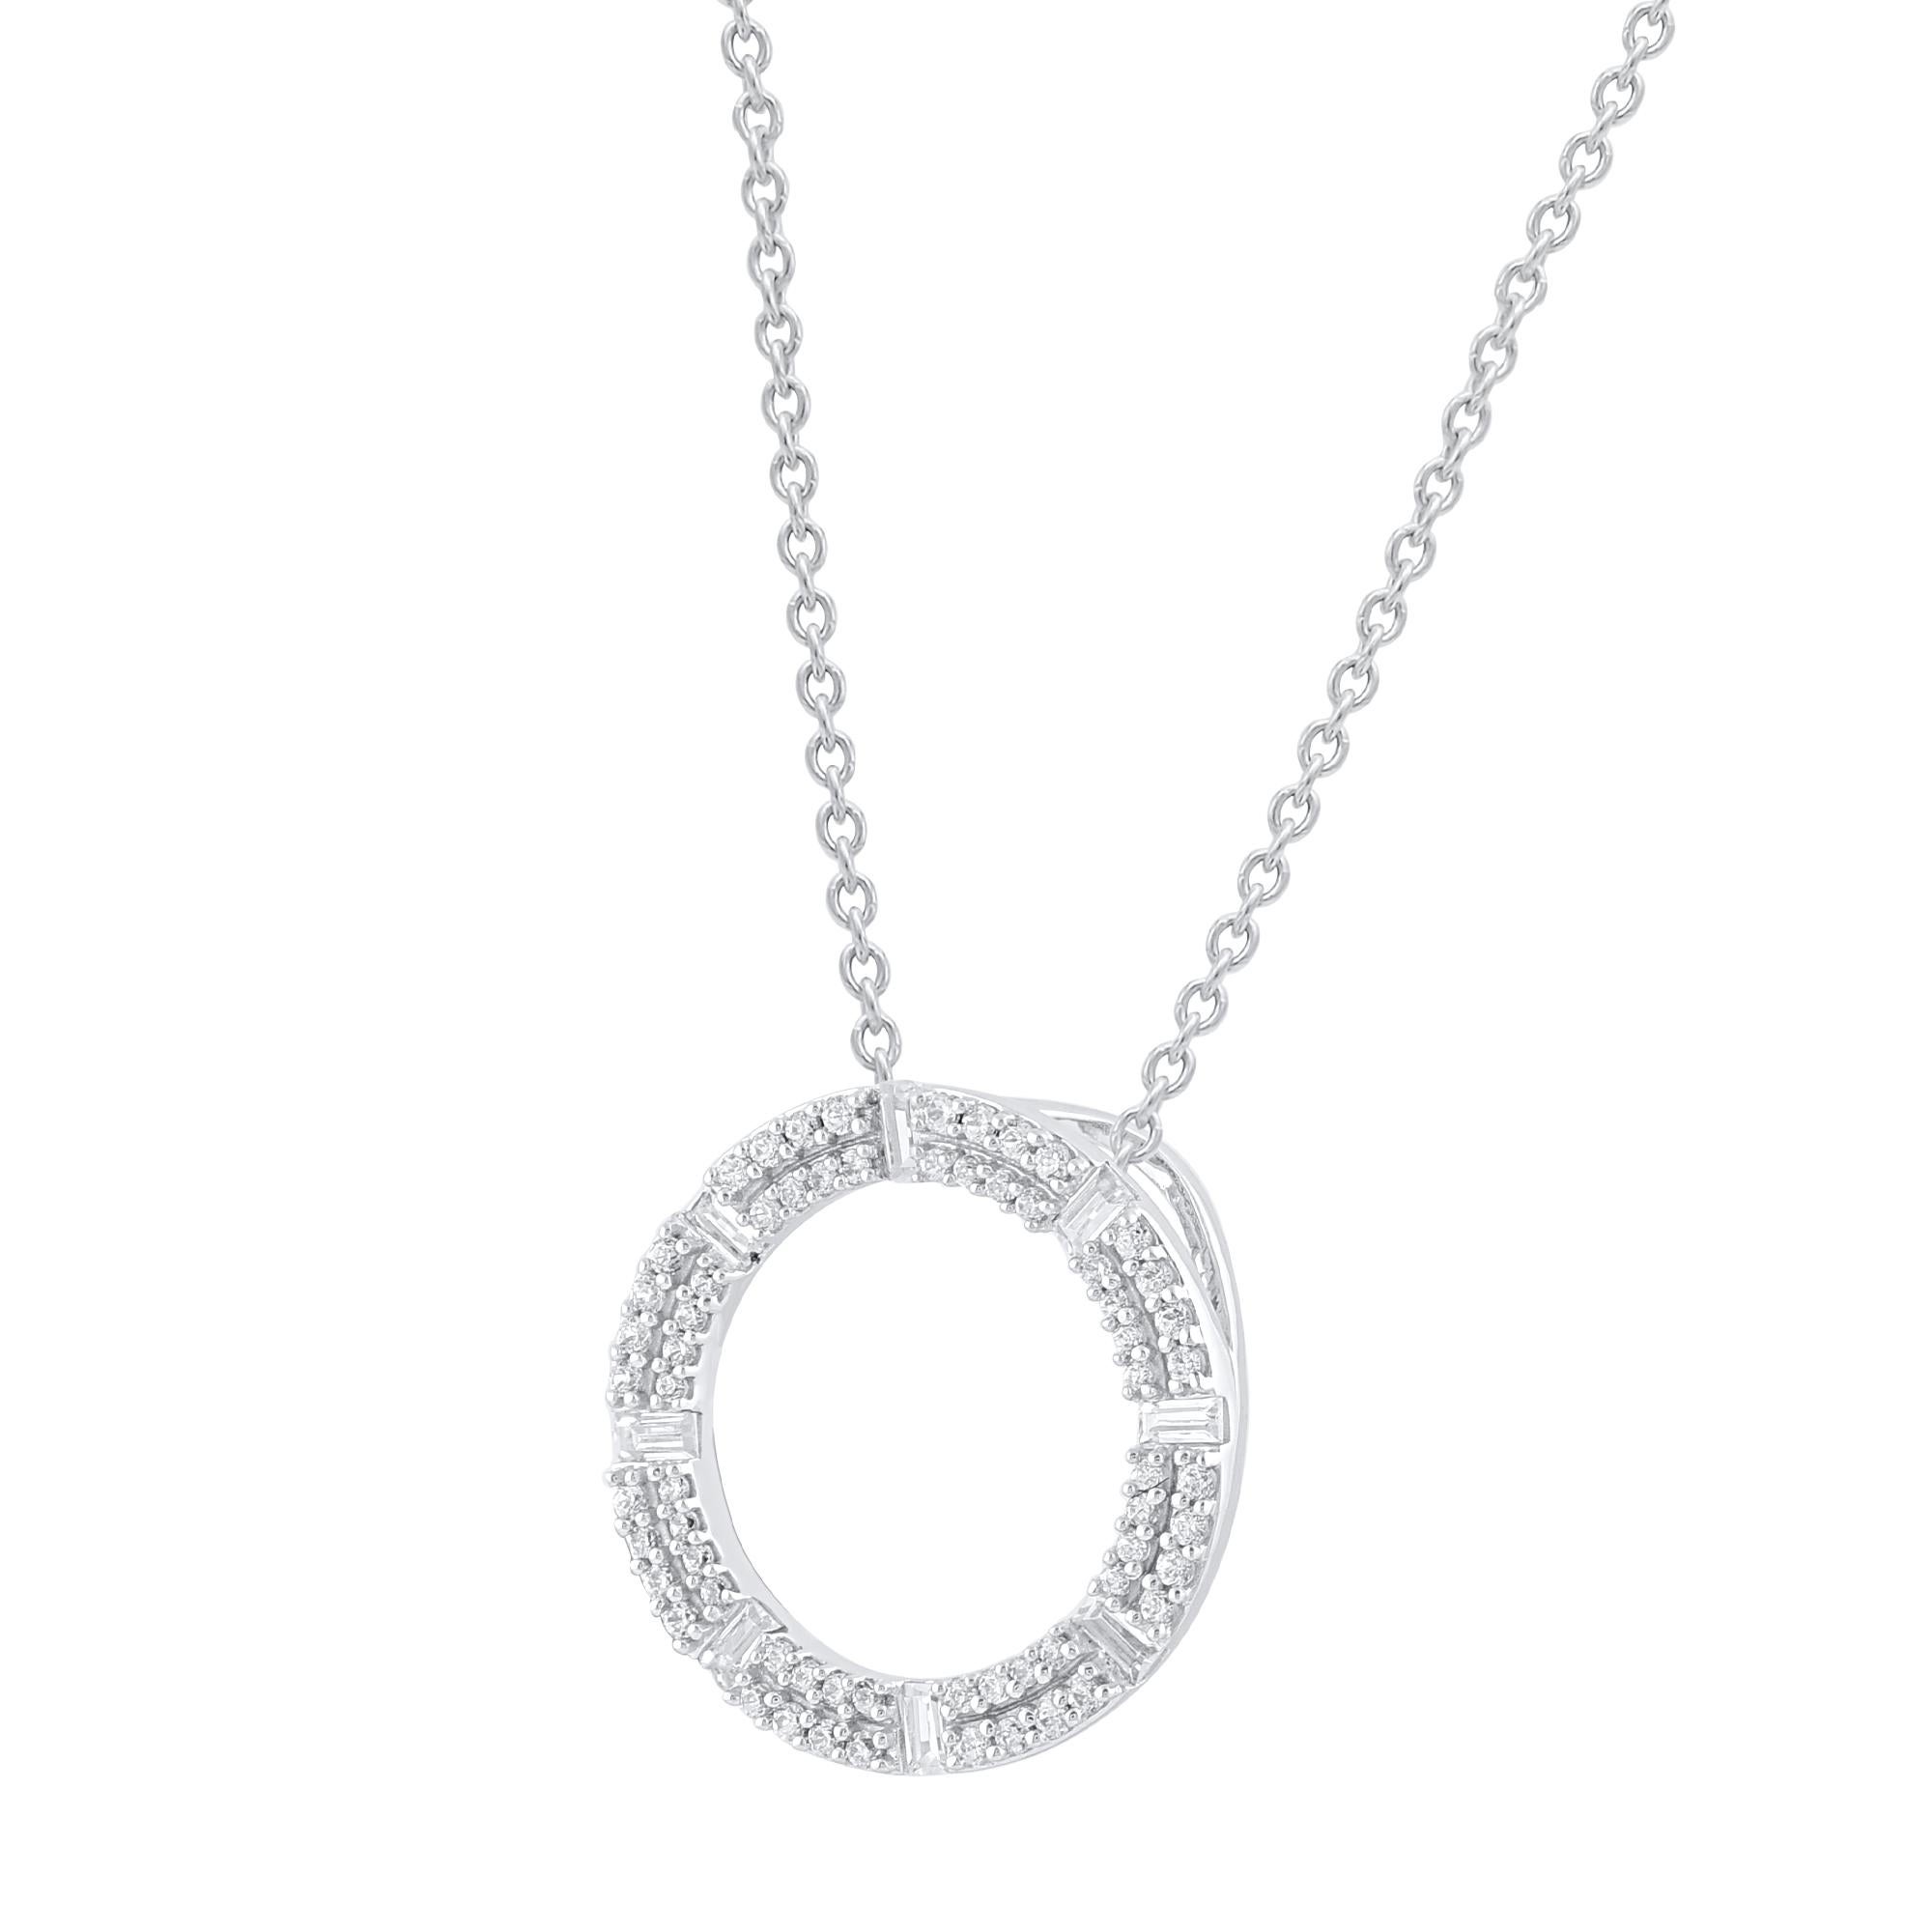 This diamond open circle eternity pendant fits any occasion with ease. These eternity pendant are studded with 72 round and baguette natural diamonds in prong & channel setting in 18kt white gold. Diamonds are graded as H-I color and I-2 clarity.